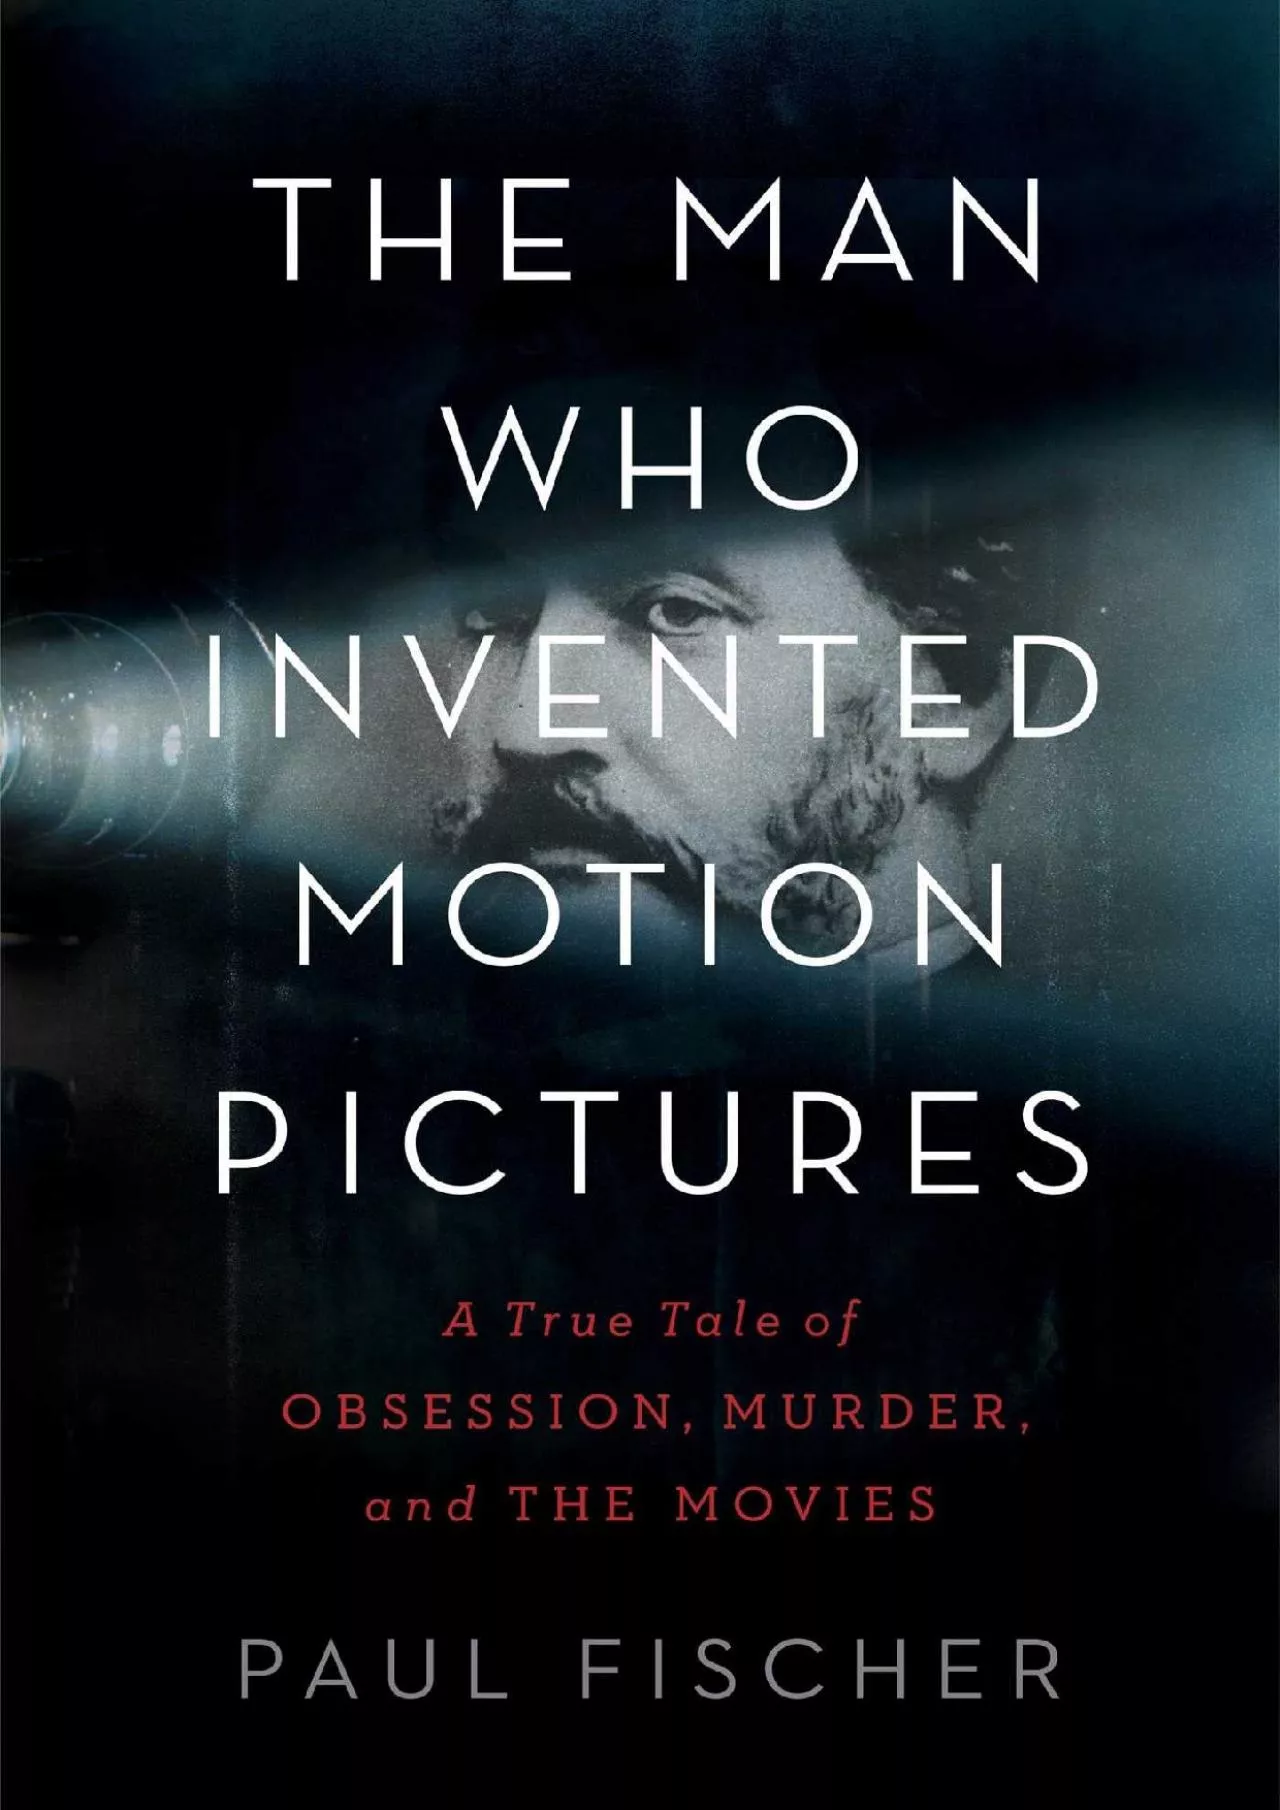 [BOOK]-The Man Who Invented Motion Pictures: A True Tale of Obsession, Murder, and the